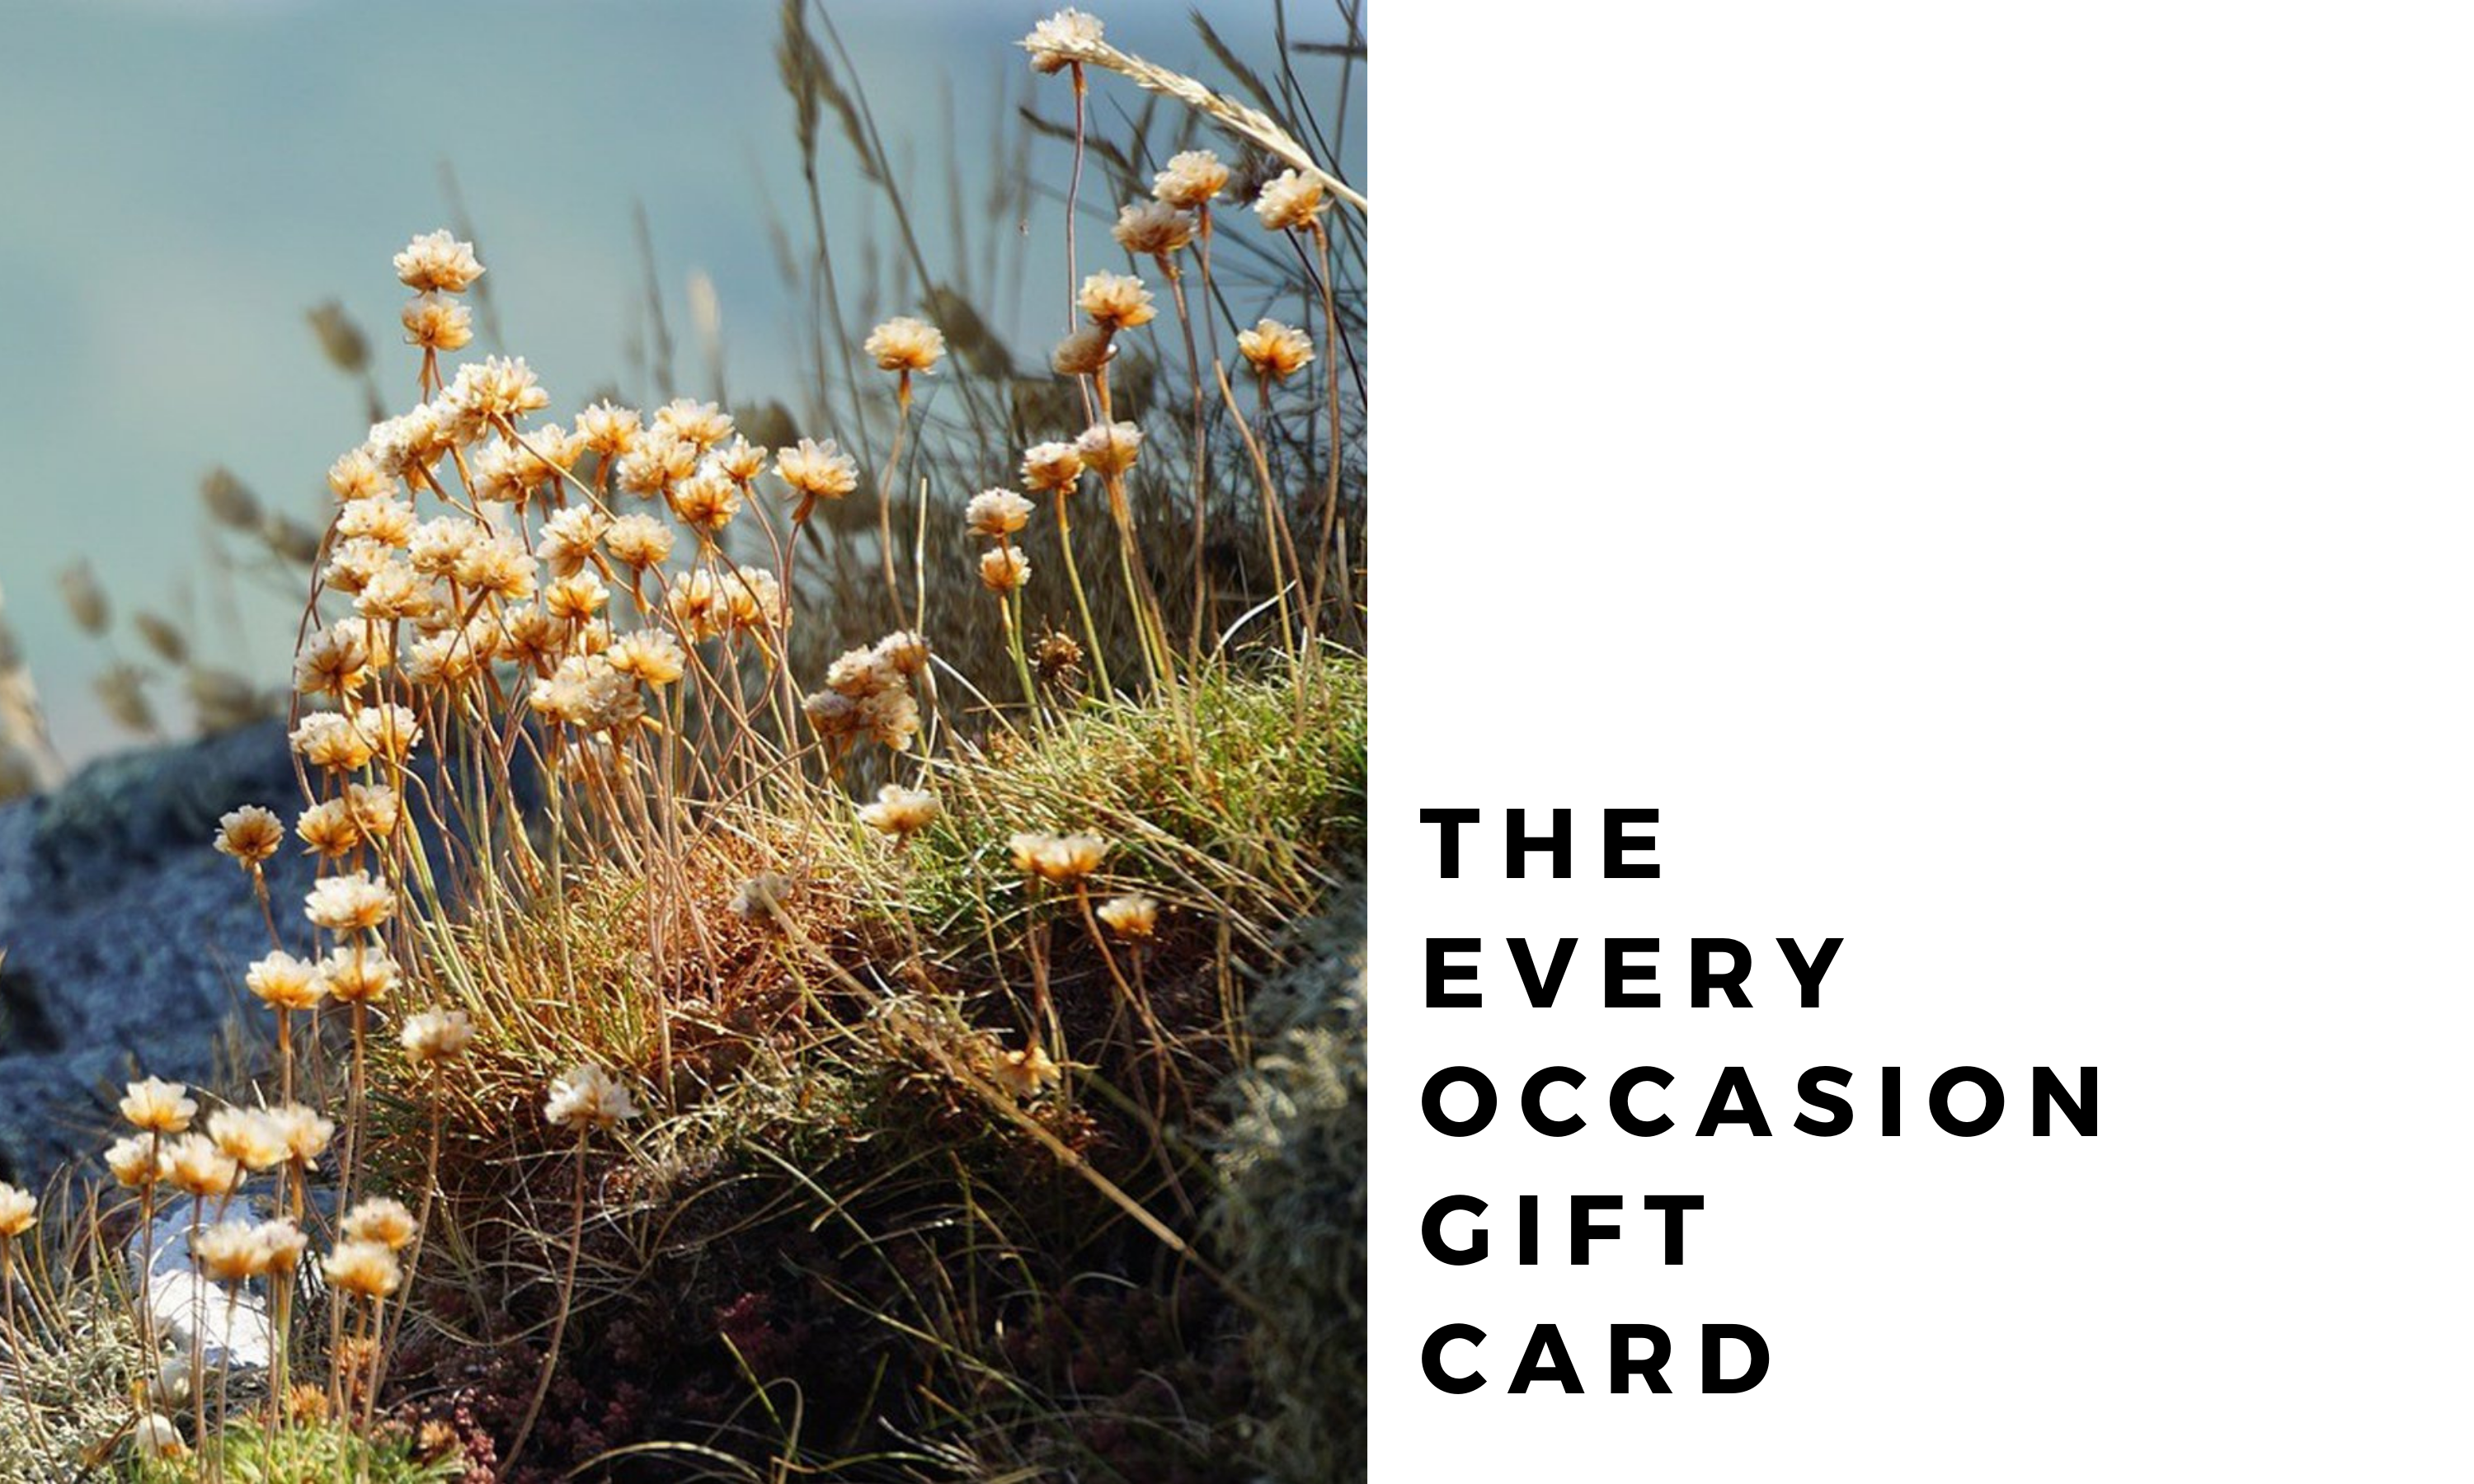 The Every Occasion Gift Card